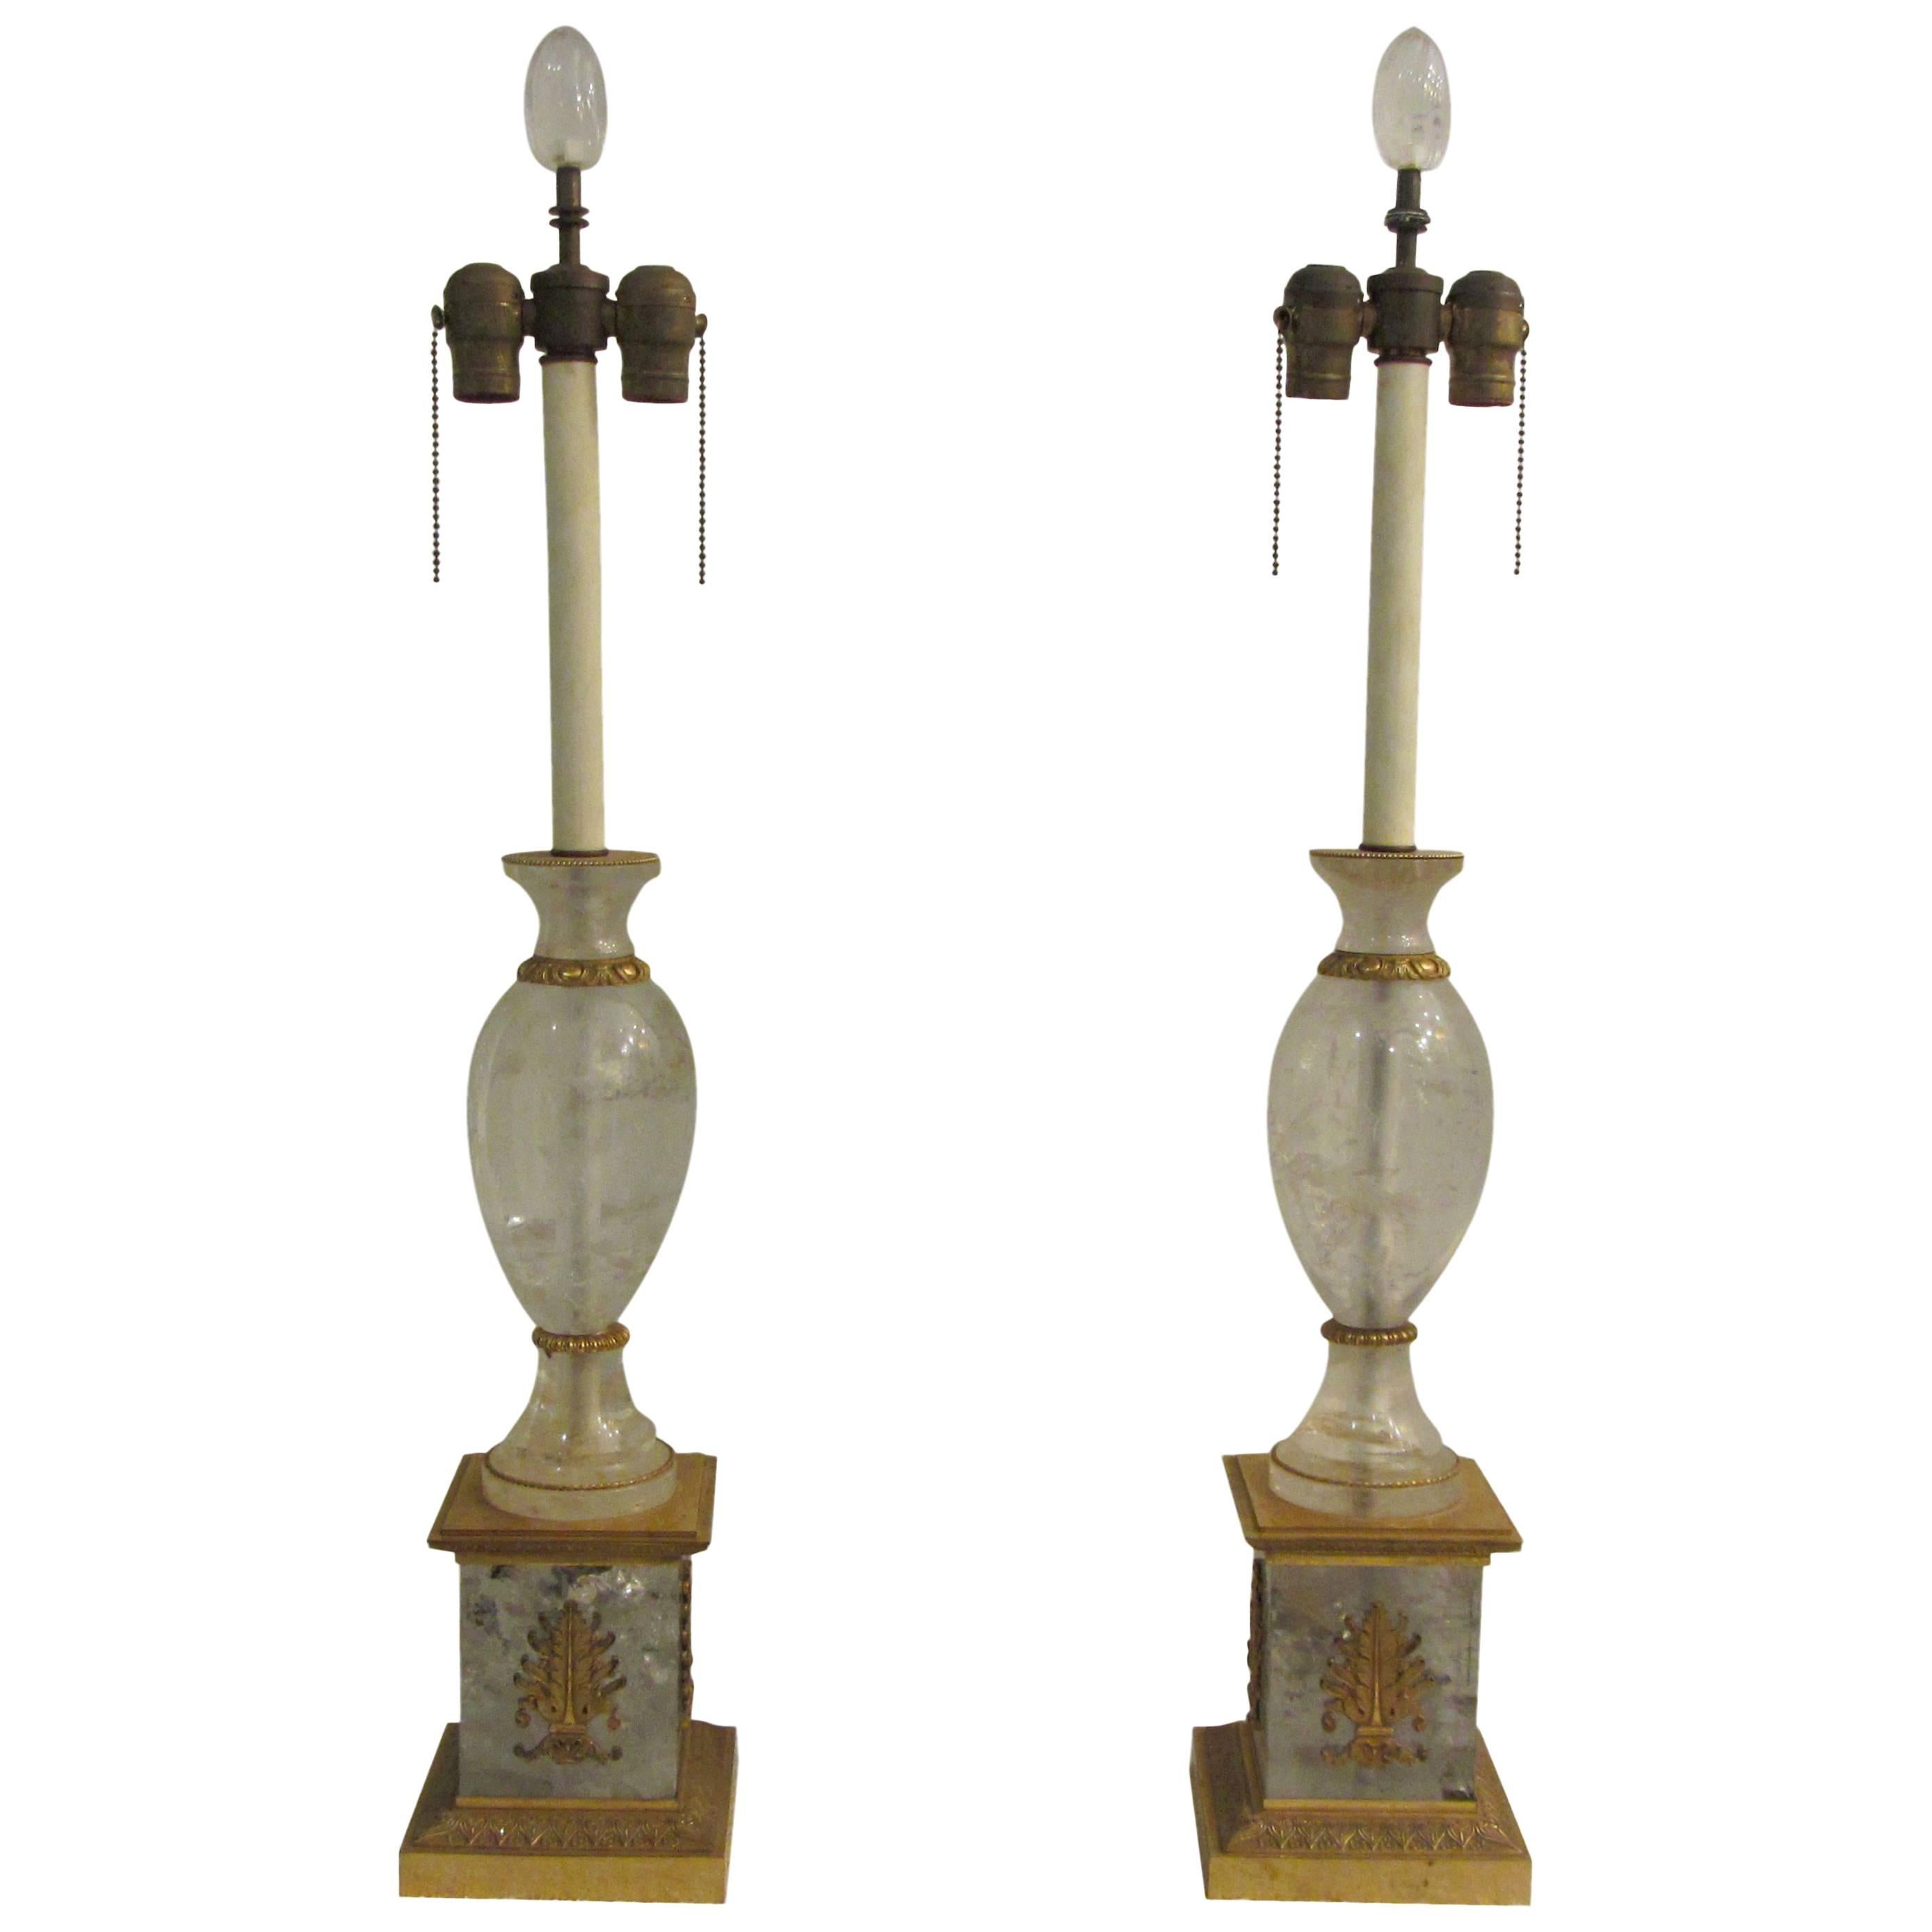 Pair of Antique French Empire Style Rock Crystal Table Lamps